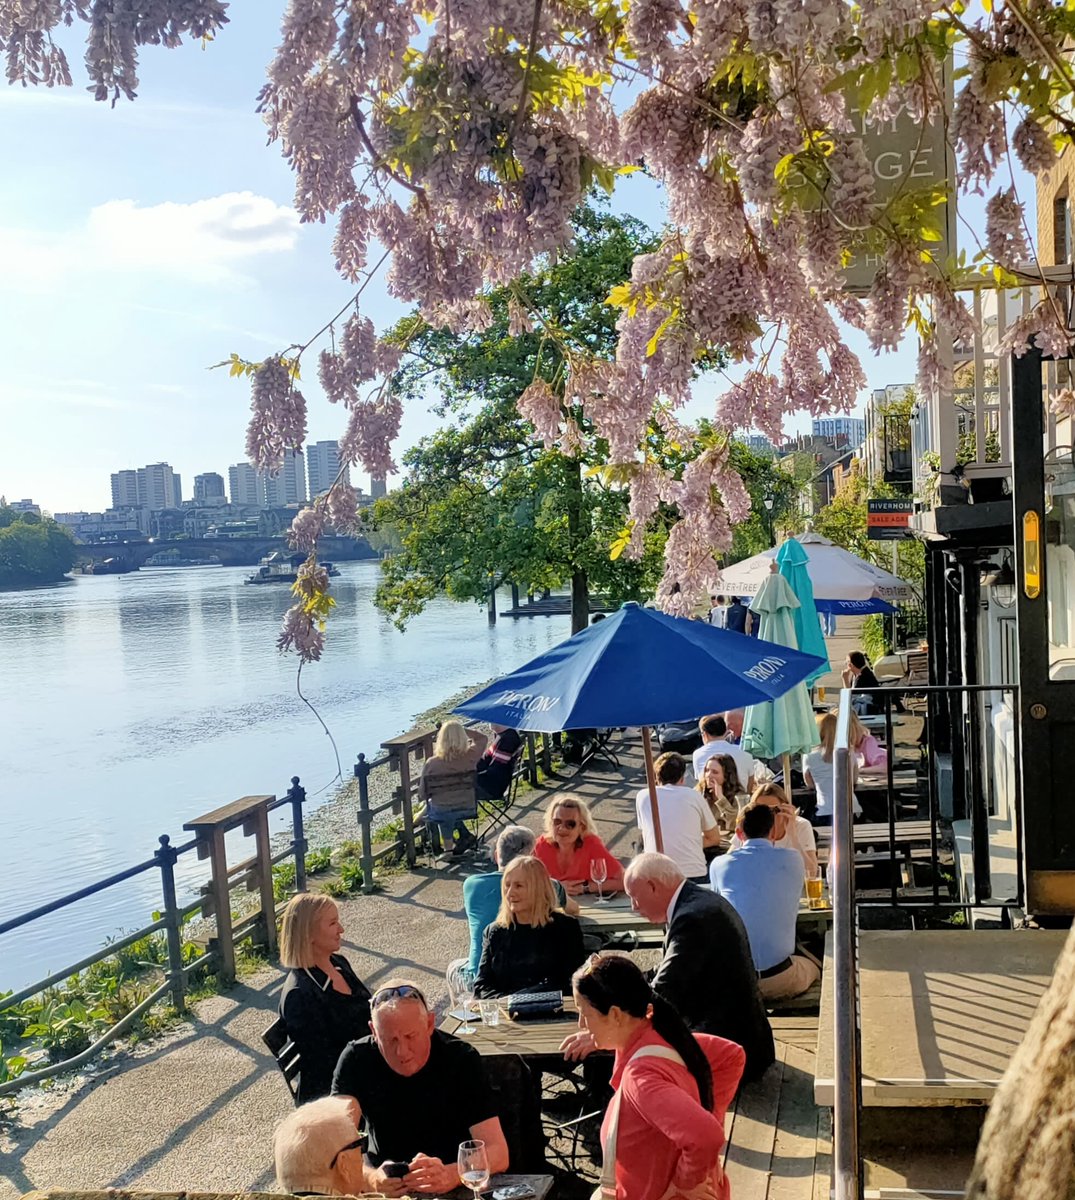 What better way to spend a sunny afternoon than at the City Barge. Great food, drinks and views, bliss! #thames #riverside #scenic #pub #riversidepubs #alfresco #dining #drinks #chiswick